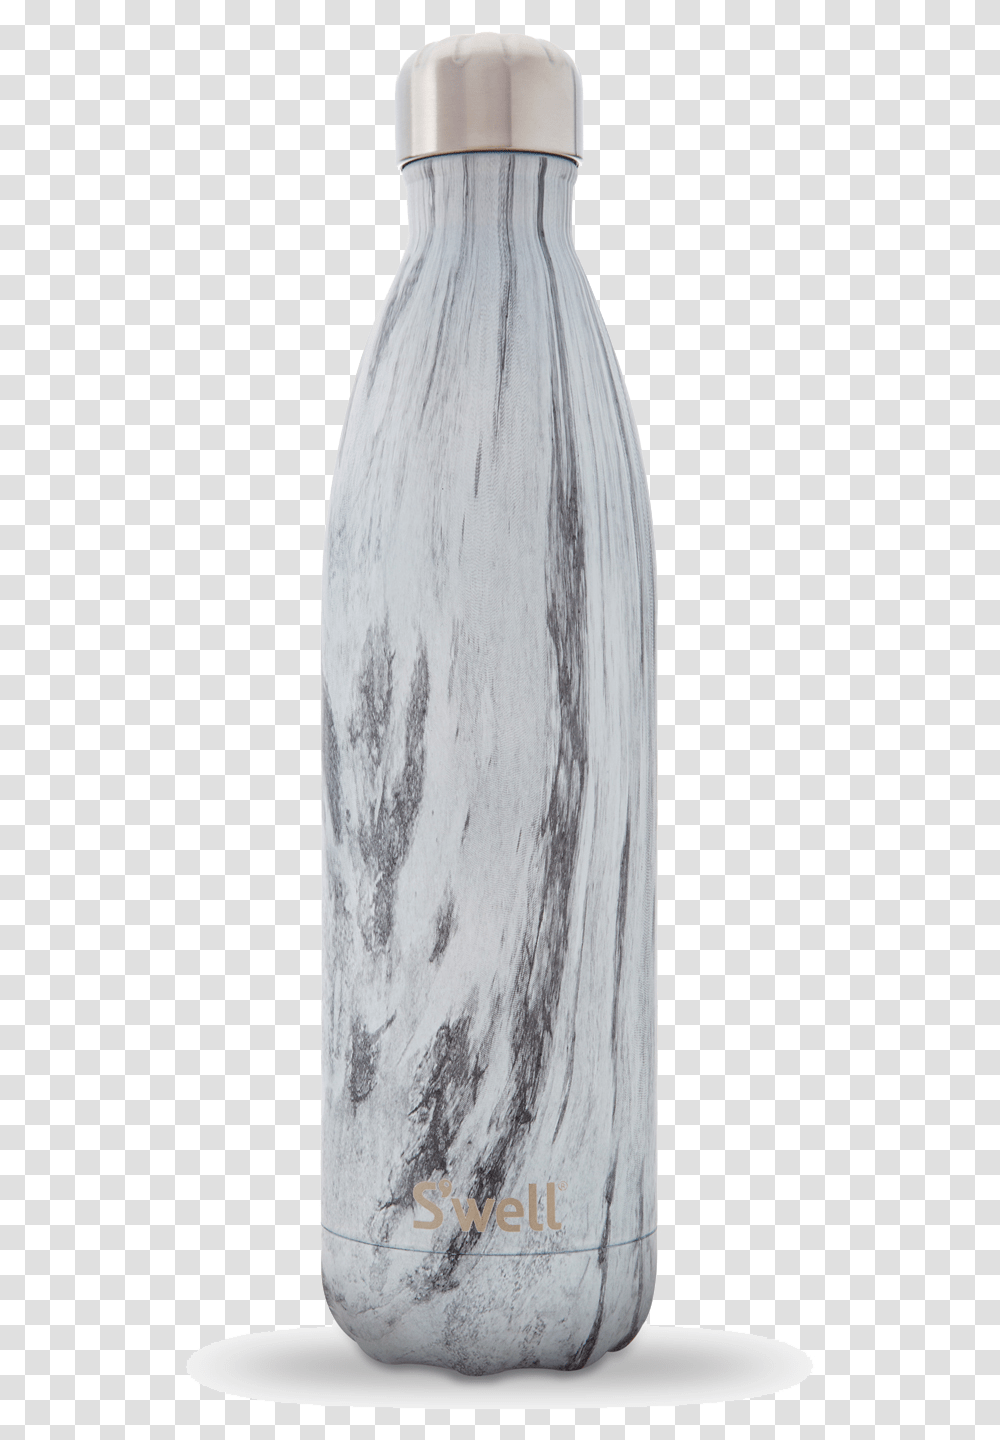 Swell Water Bottle White Wood Swell Bottle, Clothing, Art, Face, Drawing Transparent Png